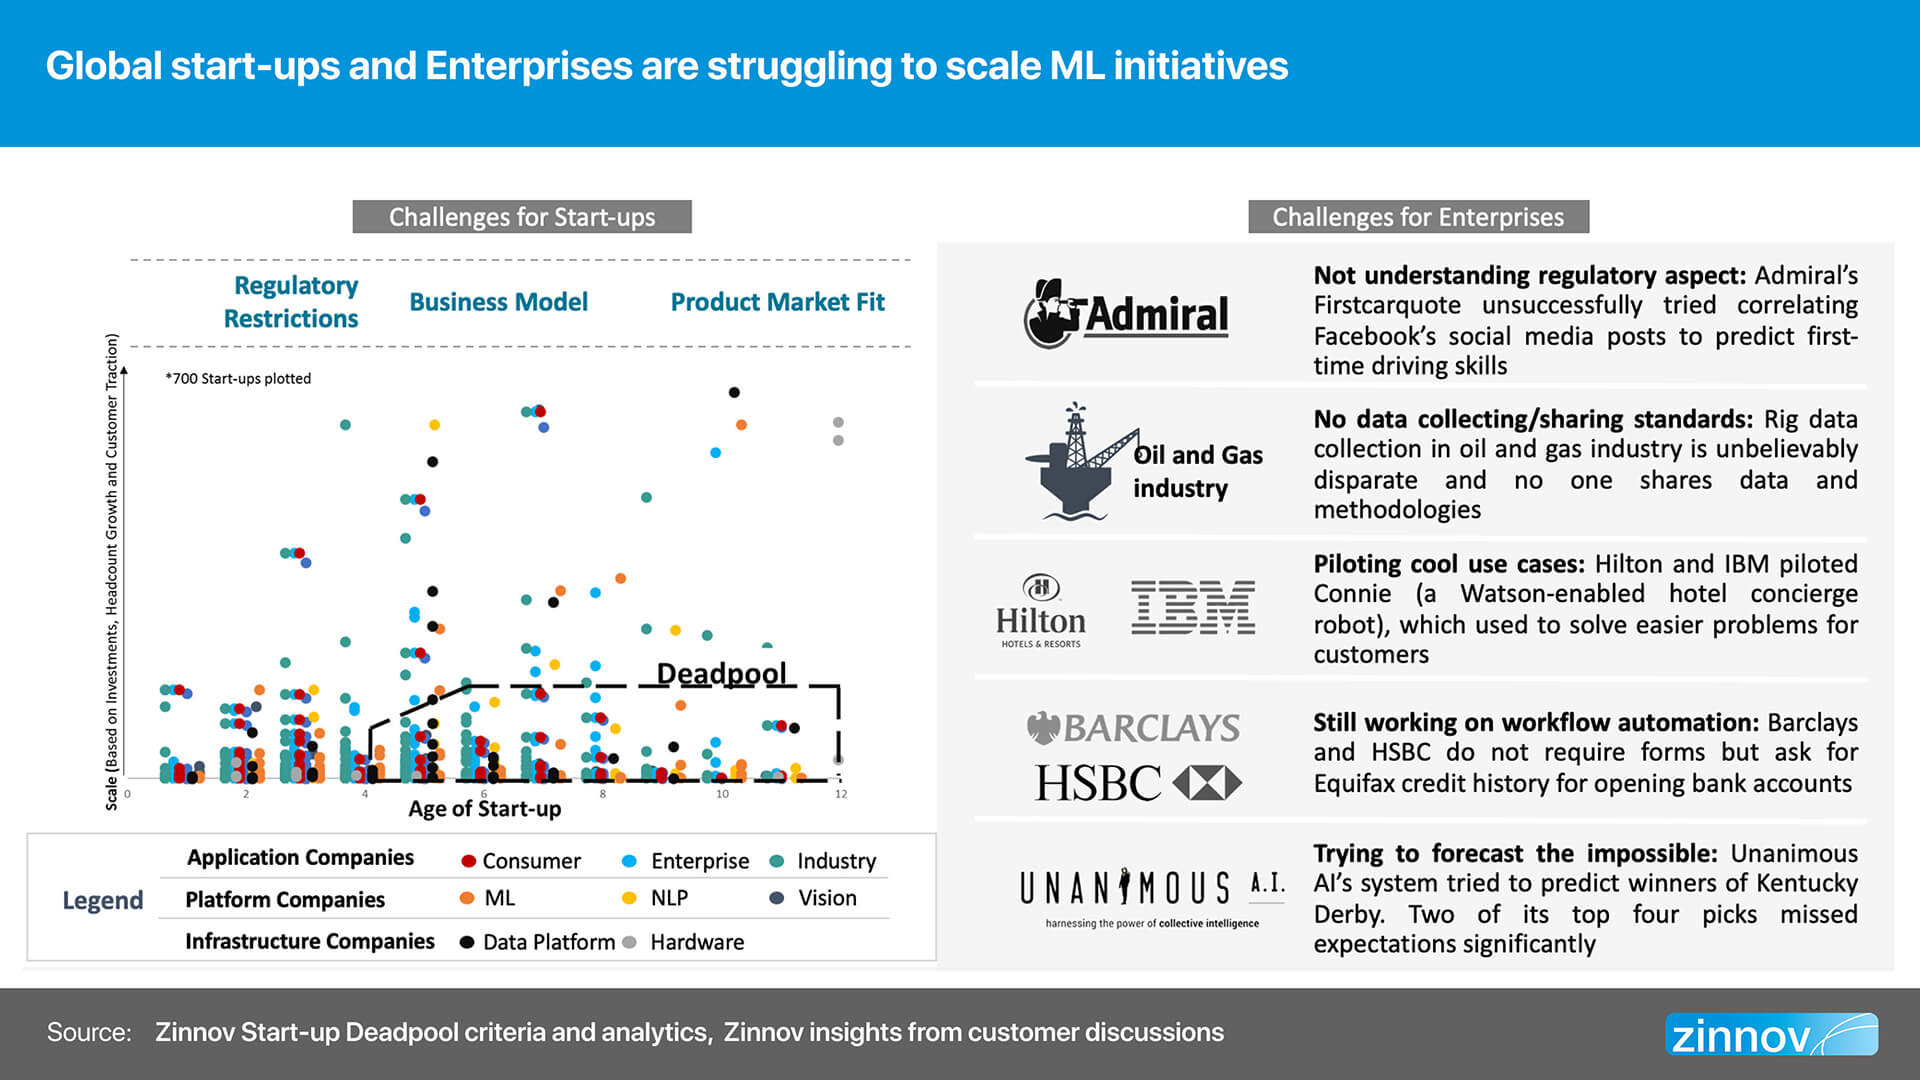 Global start-ups and enterprises are struggling to scale ML initiatives